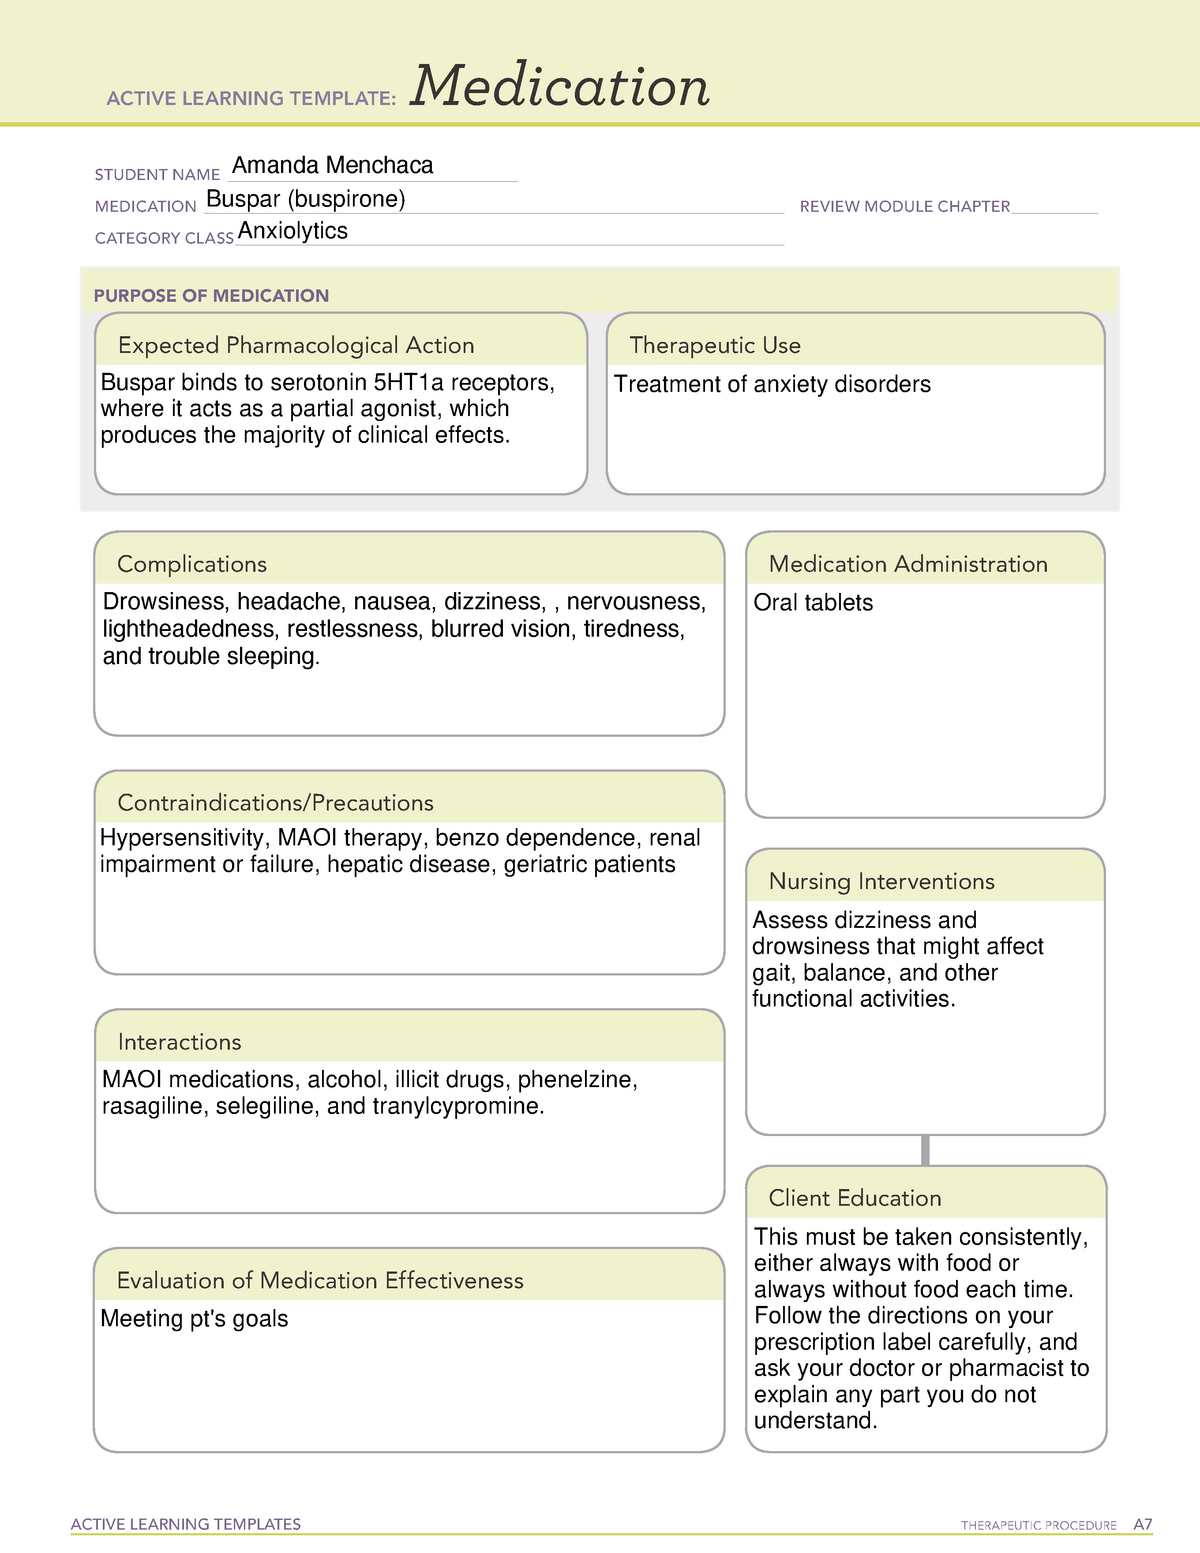 Buspar-MED - ATI medication card template - NUR23 - pharmacology With Regard To Med Card Template